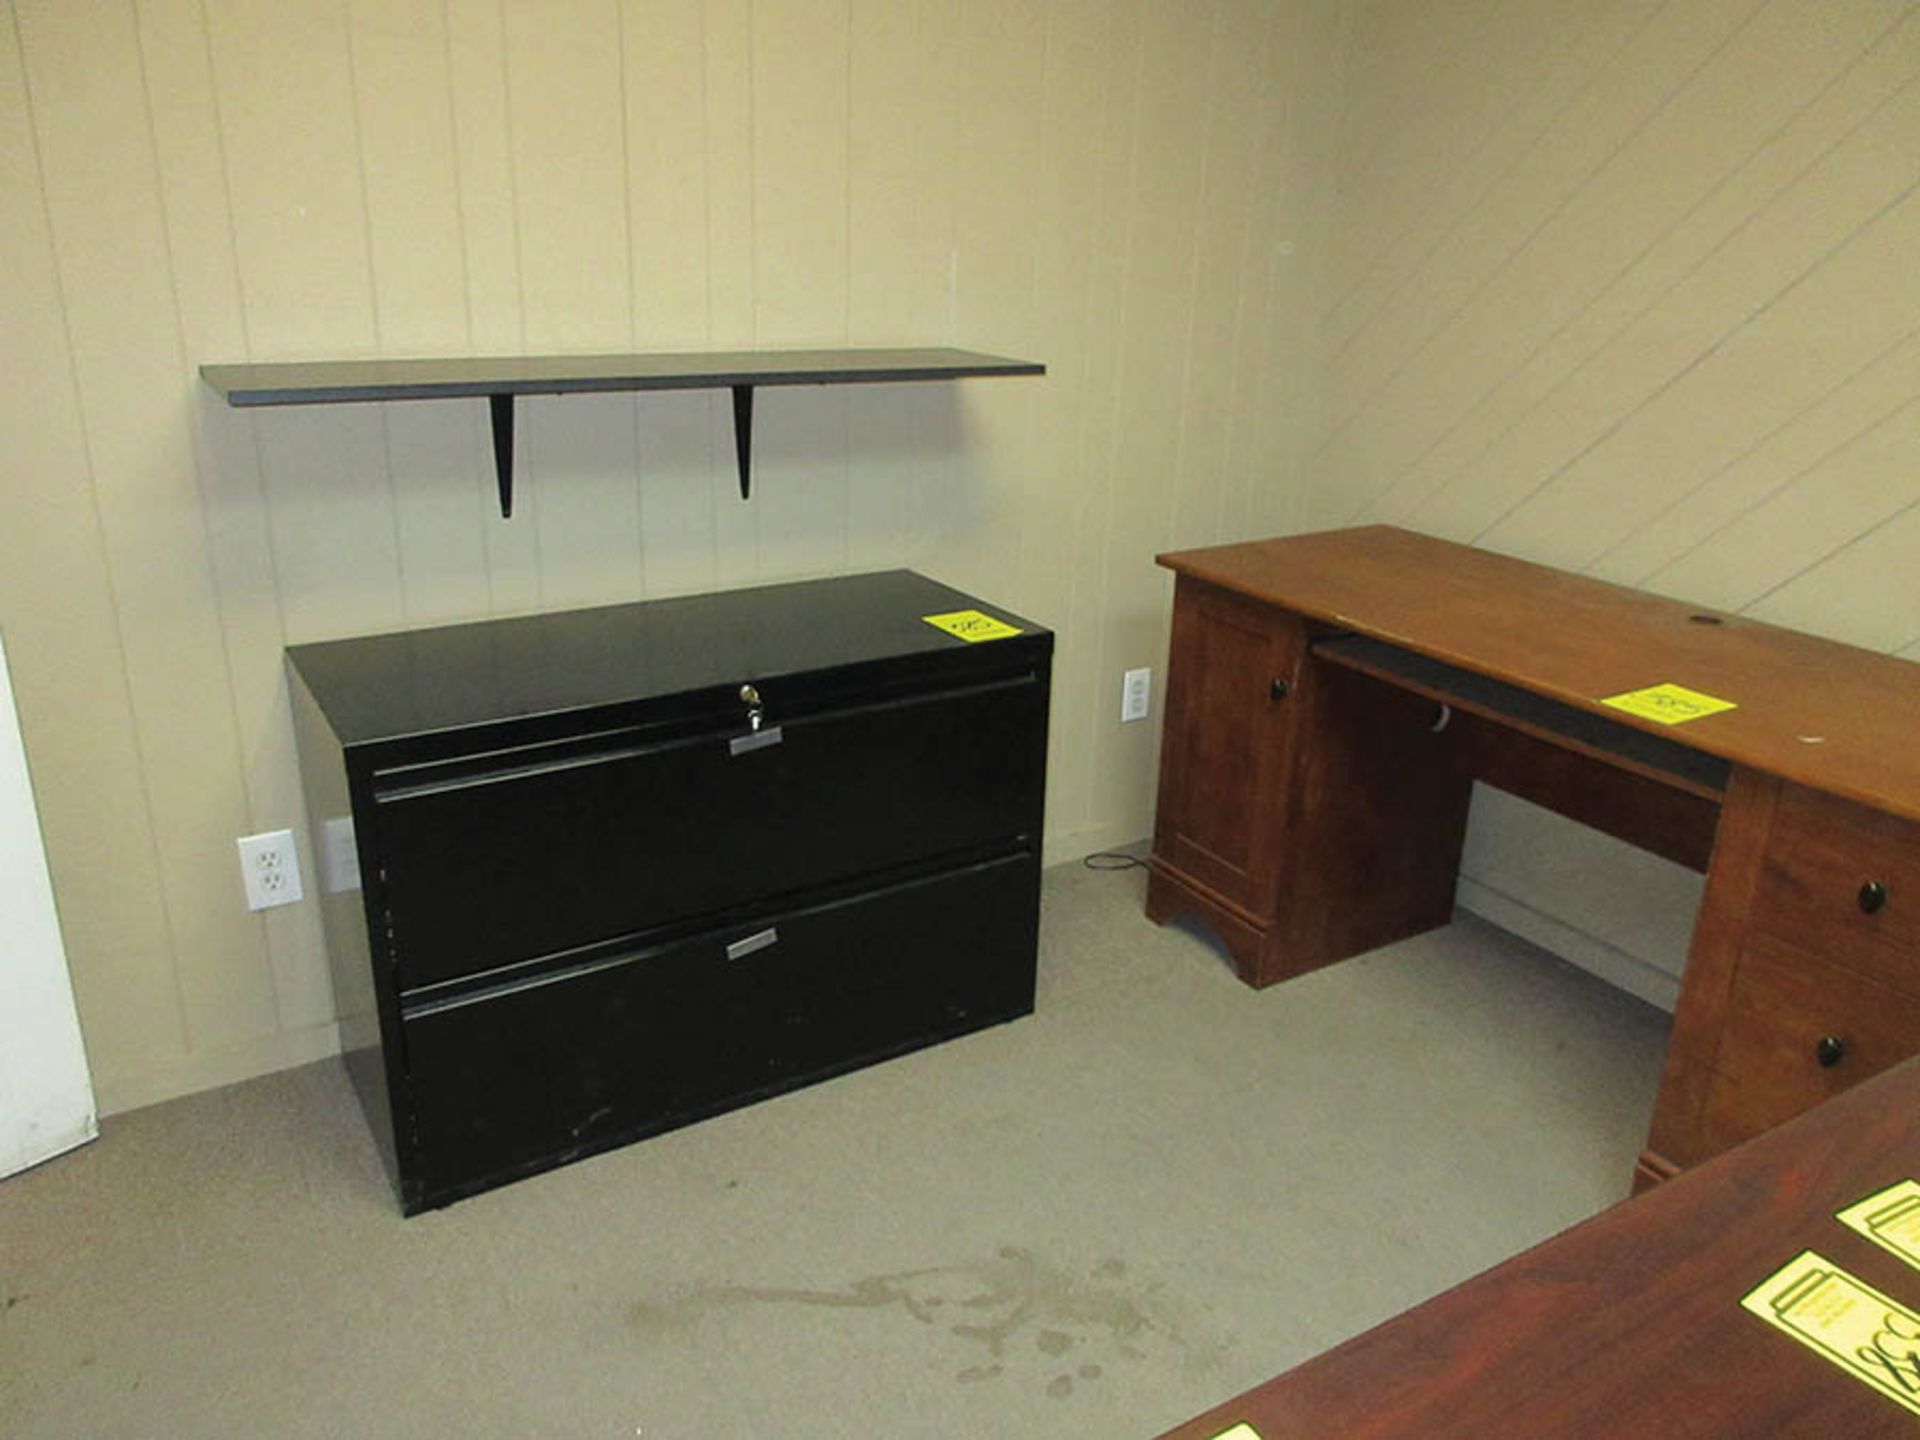 (2) DESKS, LATERAL FILE CABINET, AND 2-DOOR CABINET